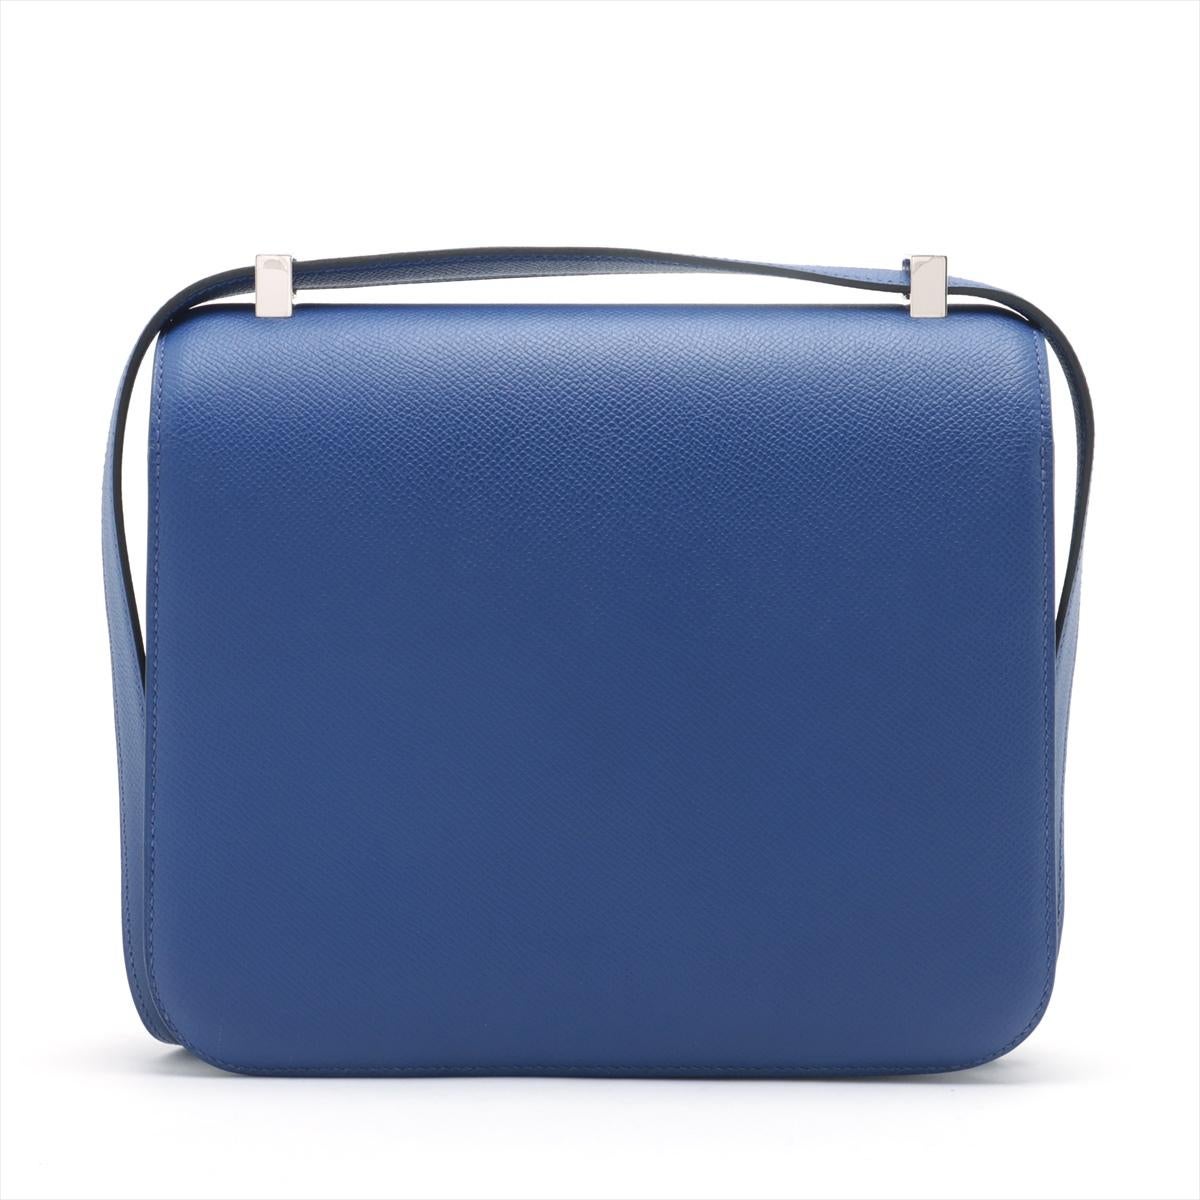 Brand: Hermès 
Style: Constance
Size: 24cm
Color: Blue Royale
Leather: Epsom Leather
Hardware: Palladium
Year: 2017 A

Condition: 
Excellent: The product is in excellent condition, displaying minimal signs of wear. The product has been